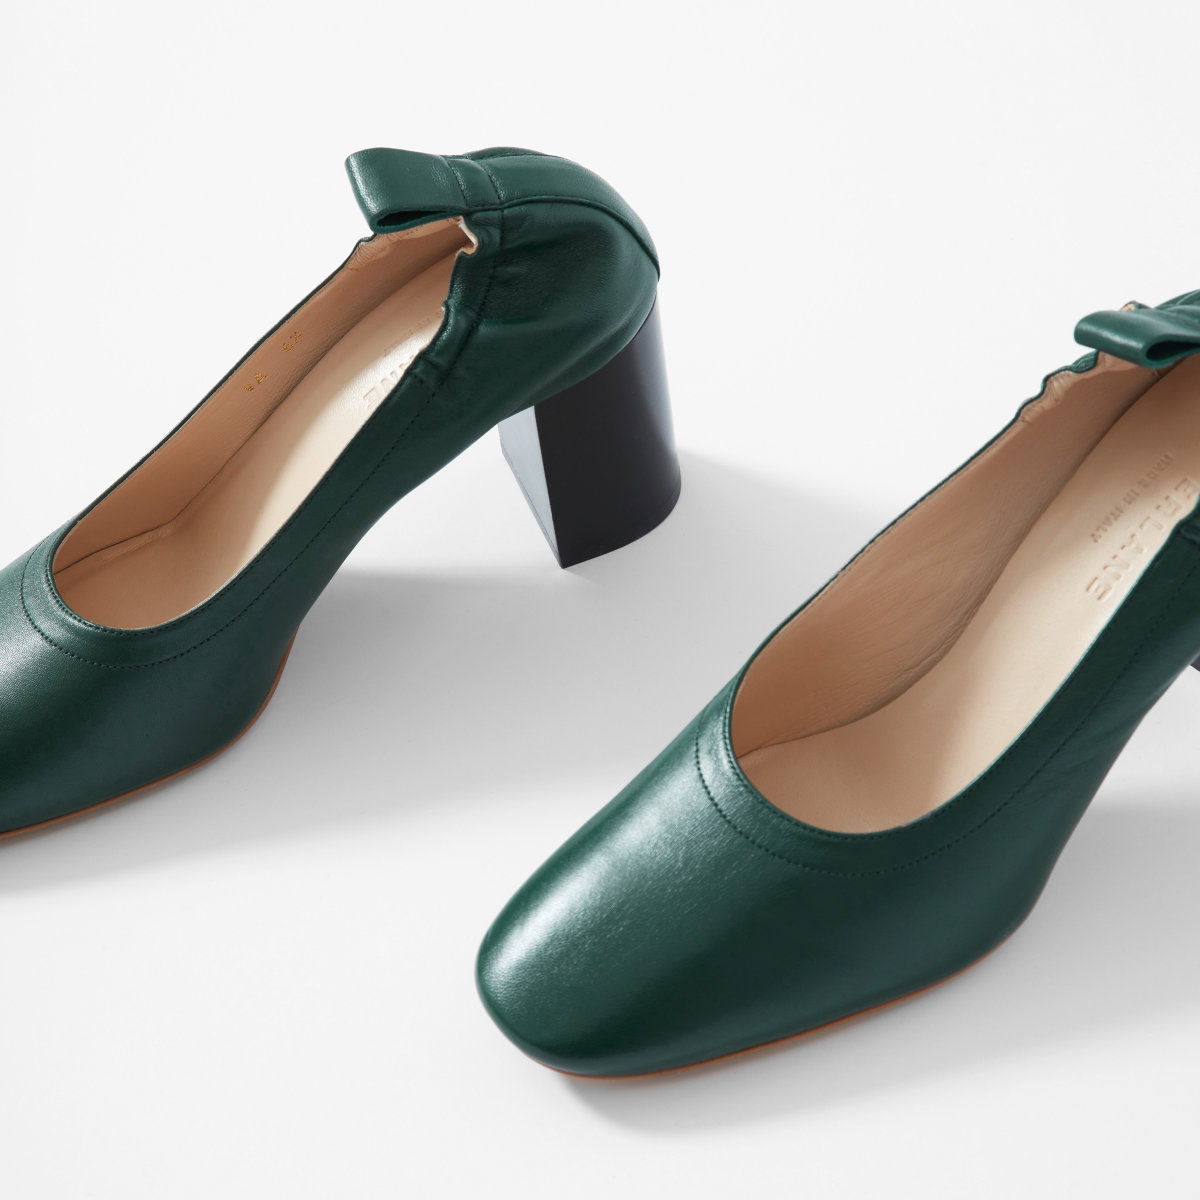 The Day High Heel by Everlane in Green